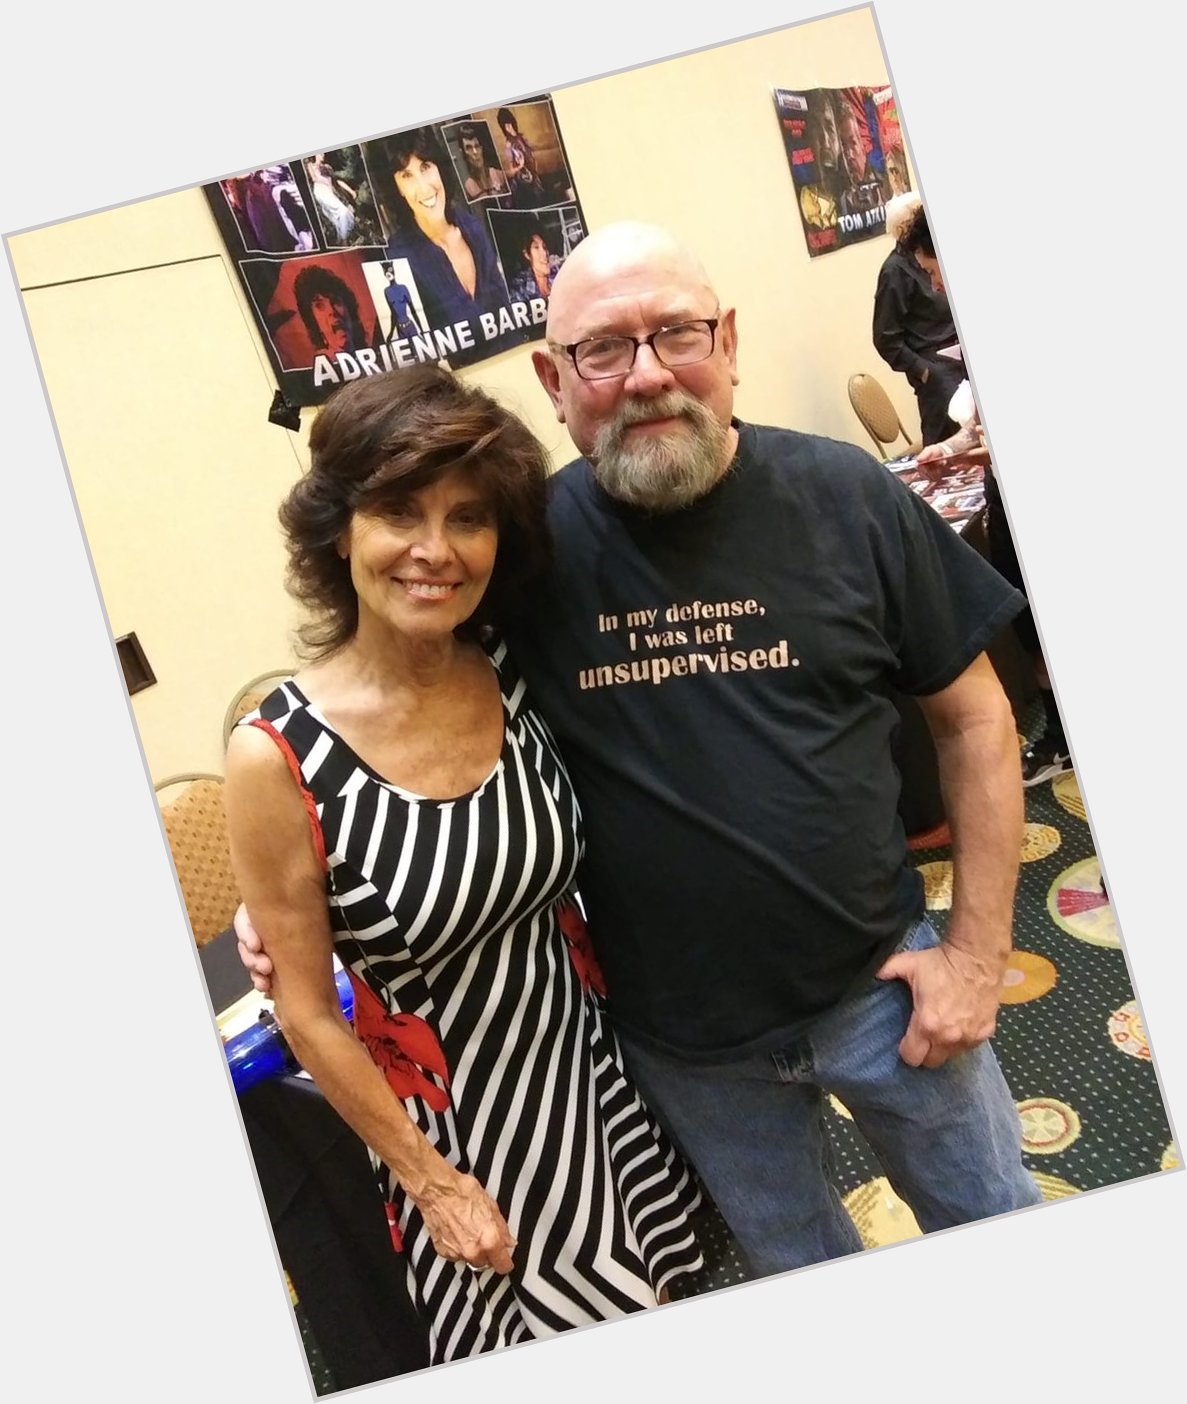 Happy Birthday Adrienne Barbeau this was such a Fanboy (boy yea right) moment!!! 